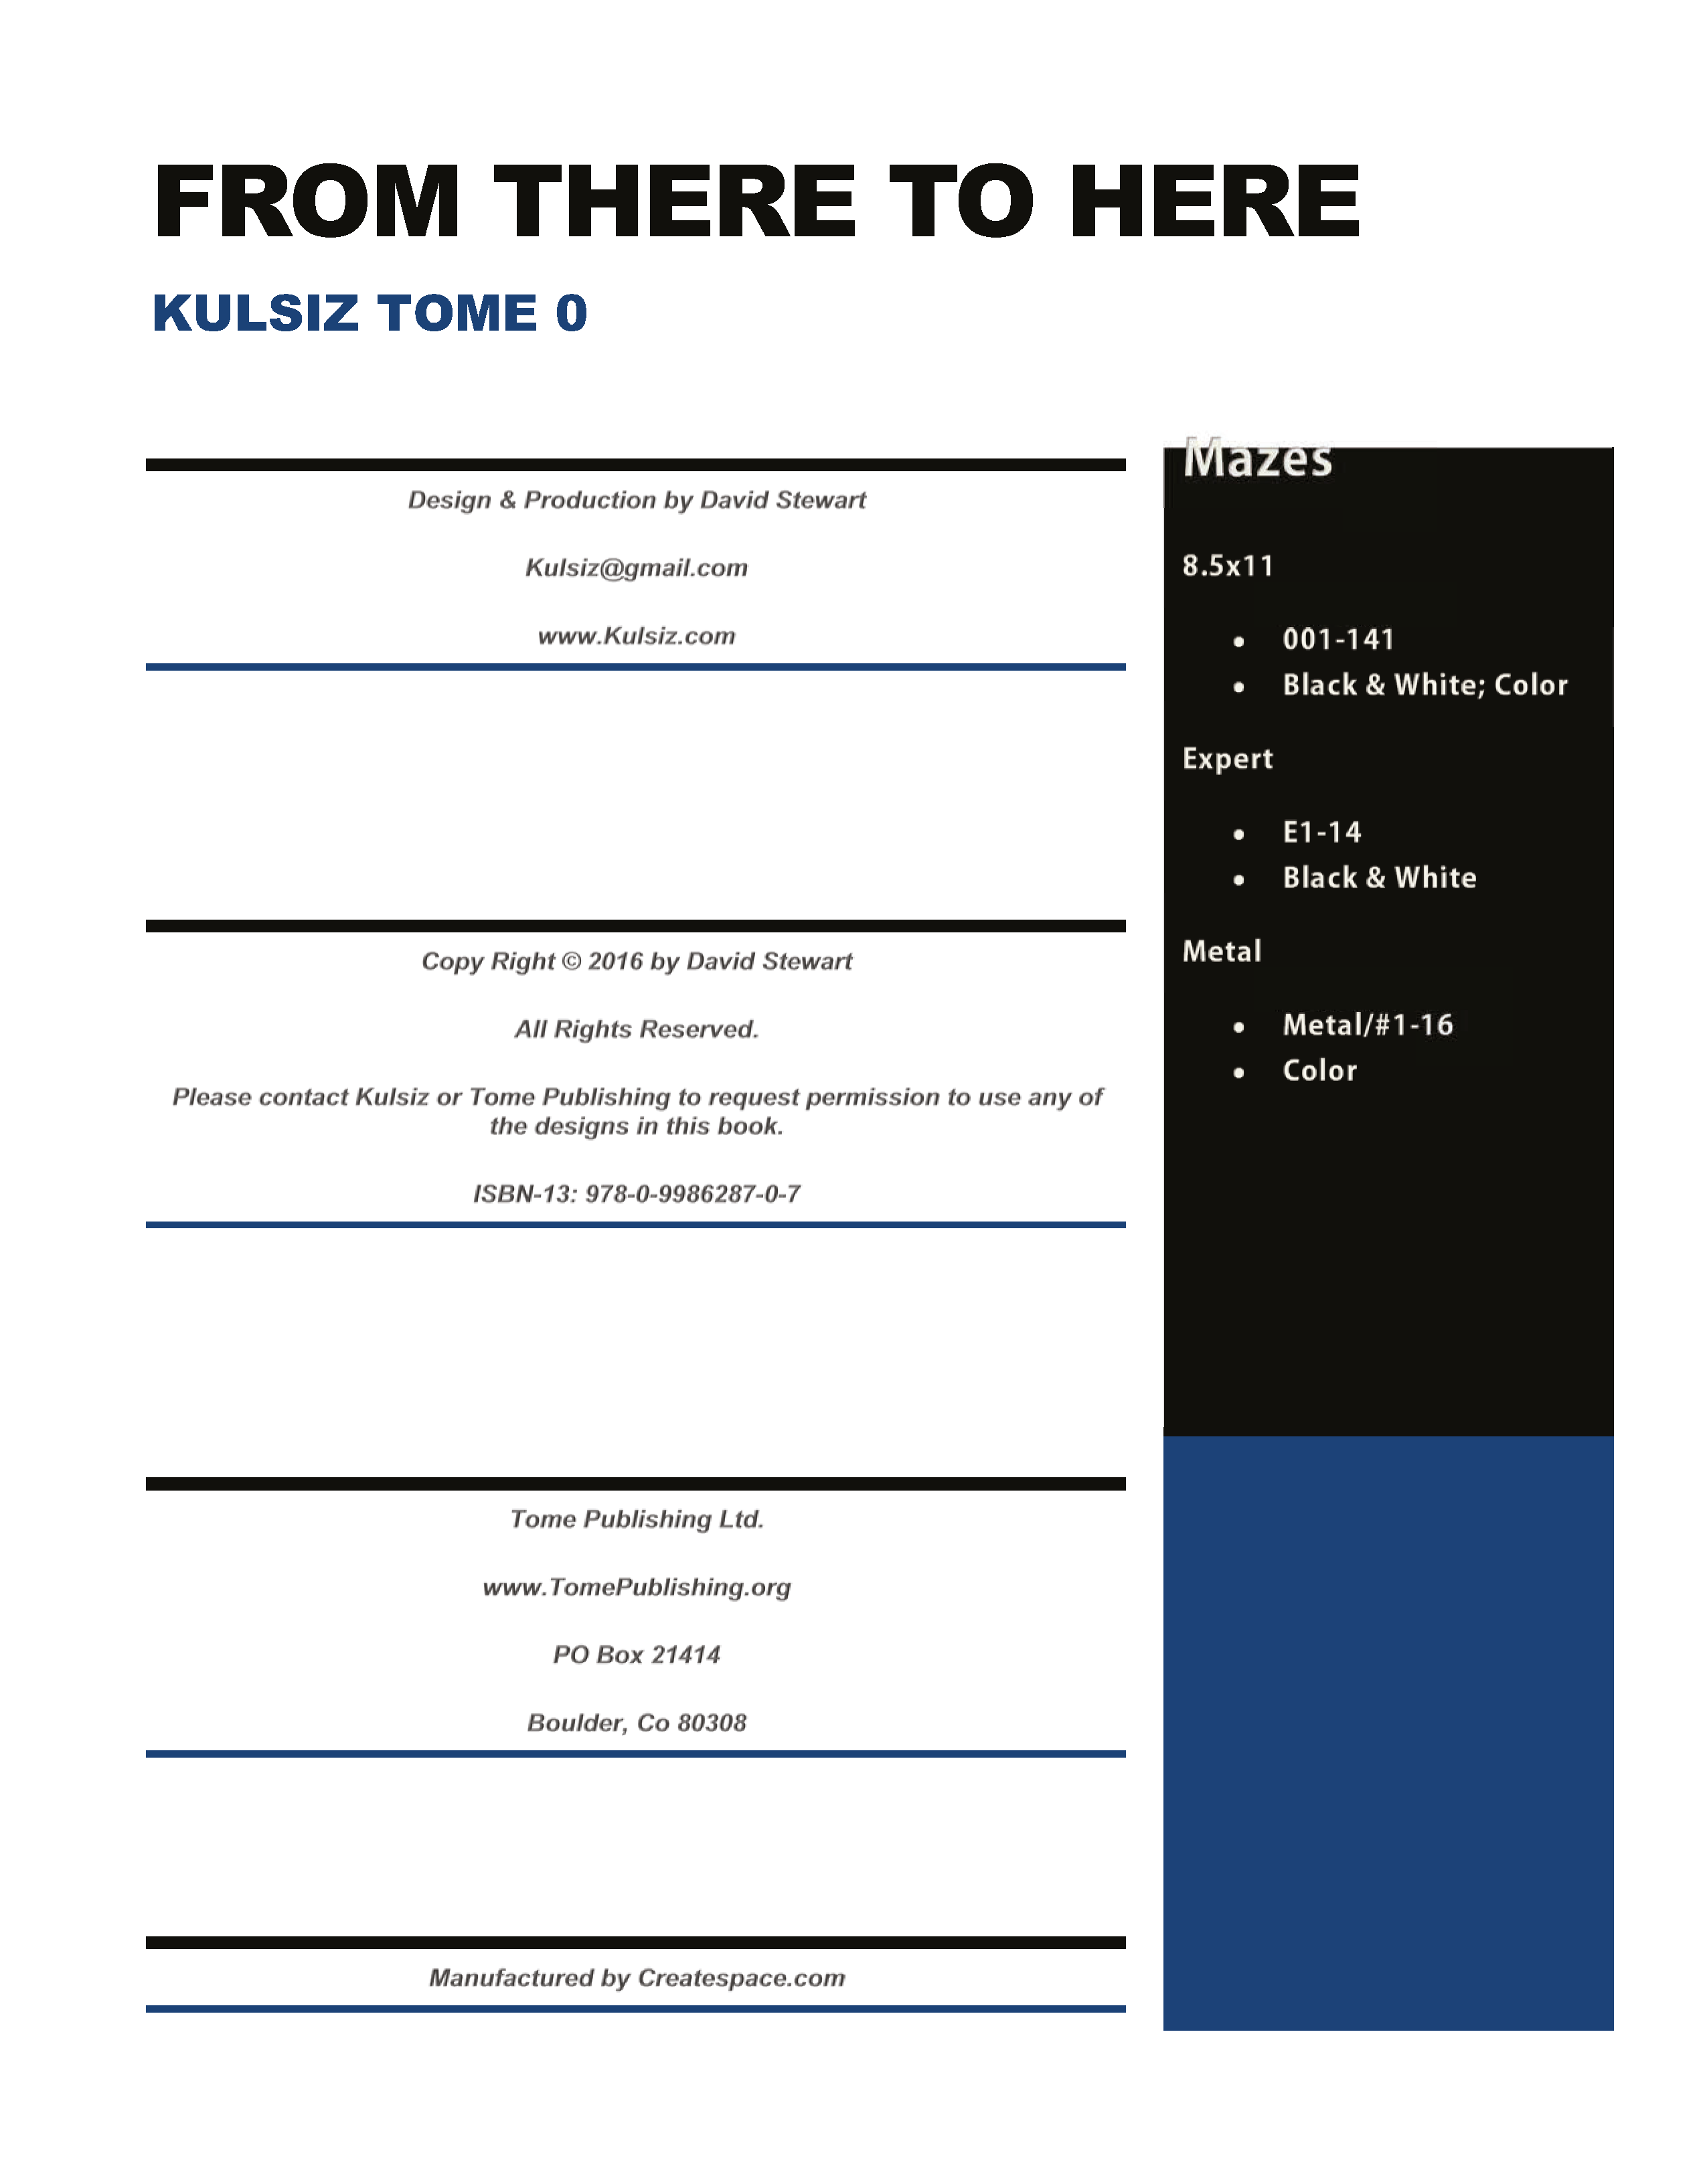 Tome 0 - Copy Right / Table of Contents